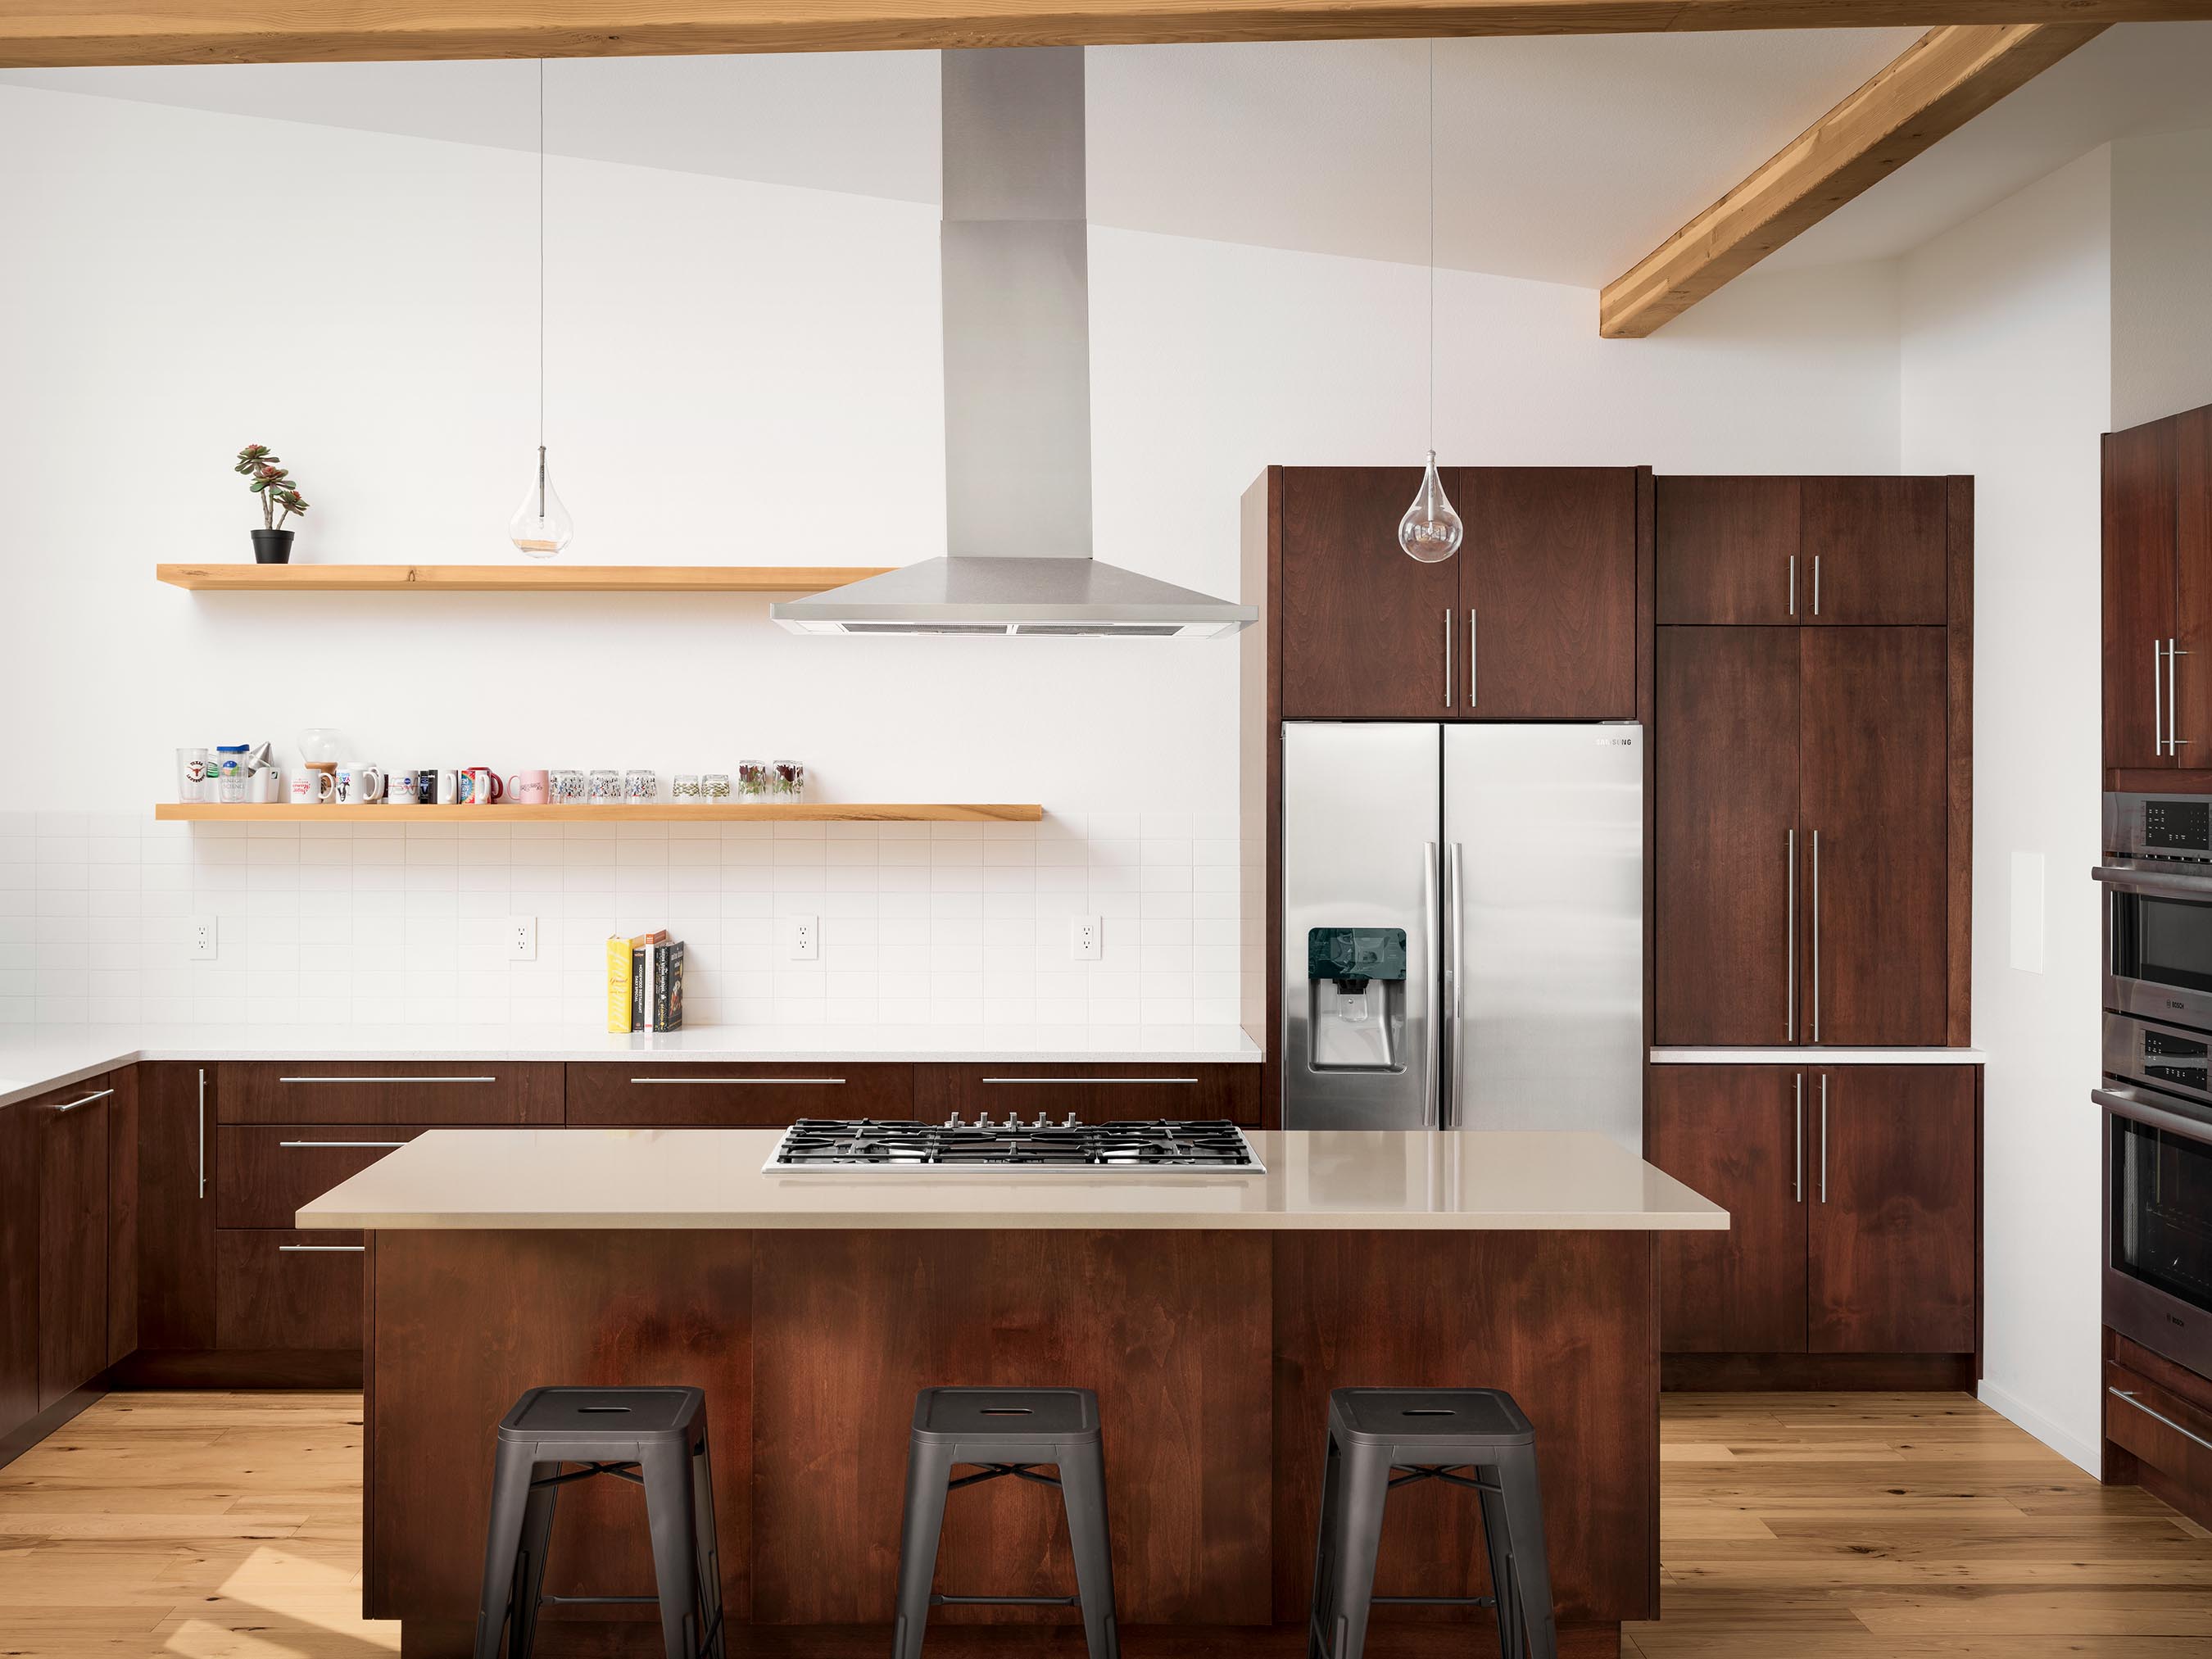 Residential architecture photography by Warren Diggles. 1 point perspective of simple modern kitchen design. New home project by Bas1s Architecture.